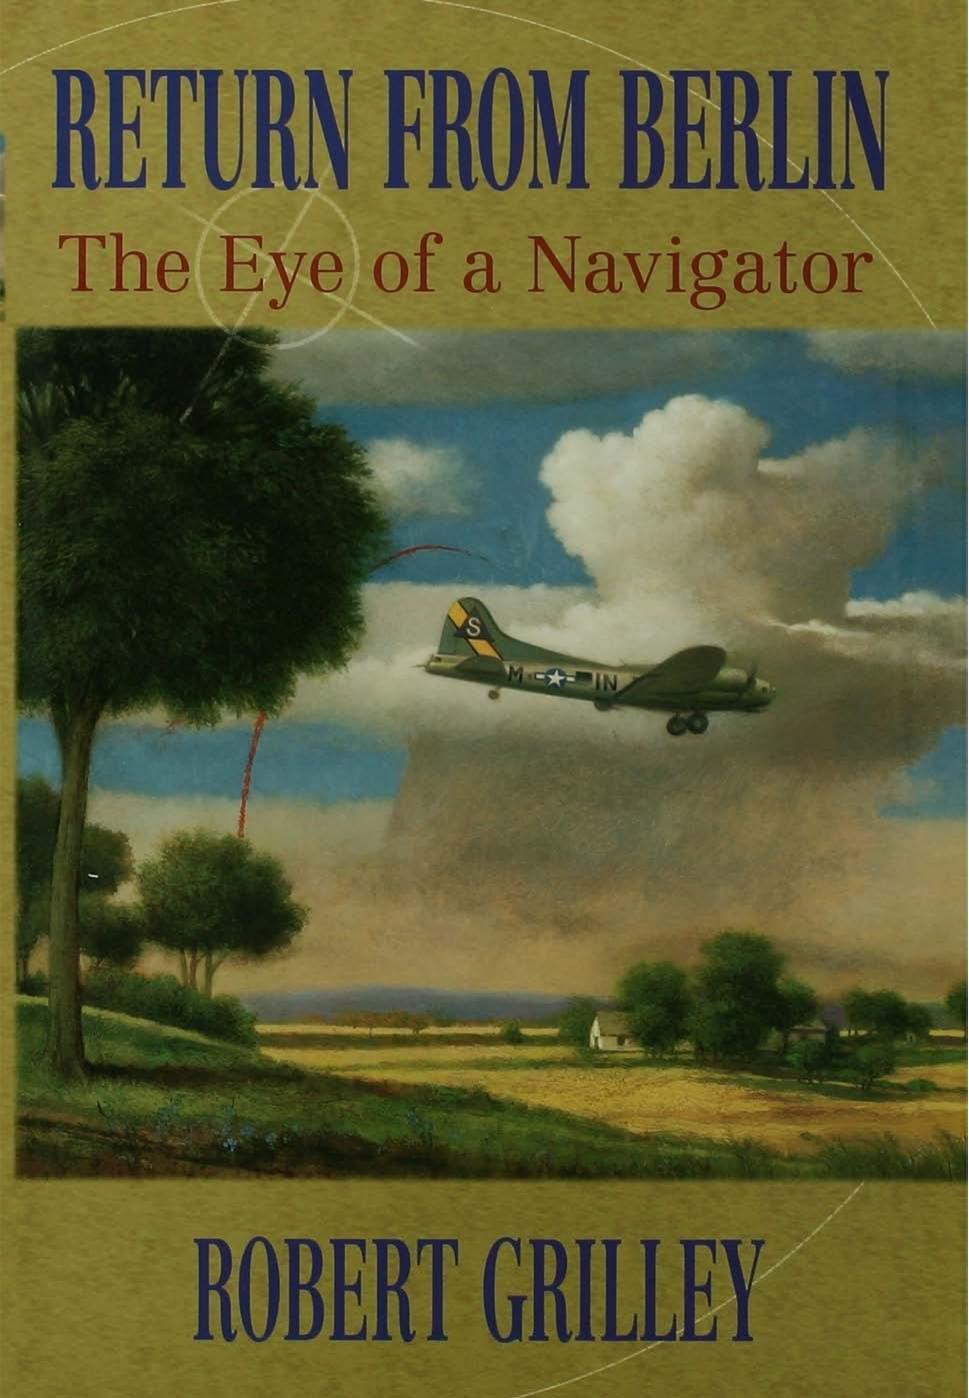 Return from Berlin: The Eye of a Navigator by Robert Grilley